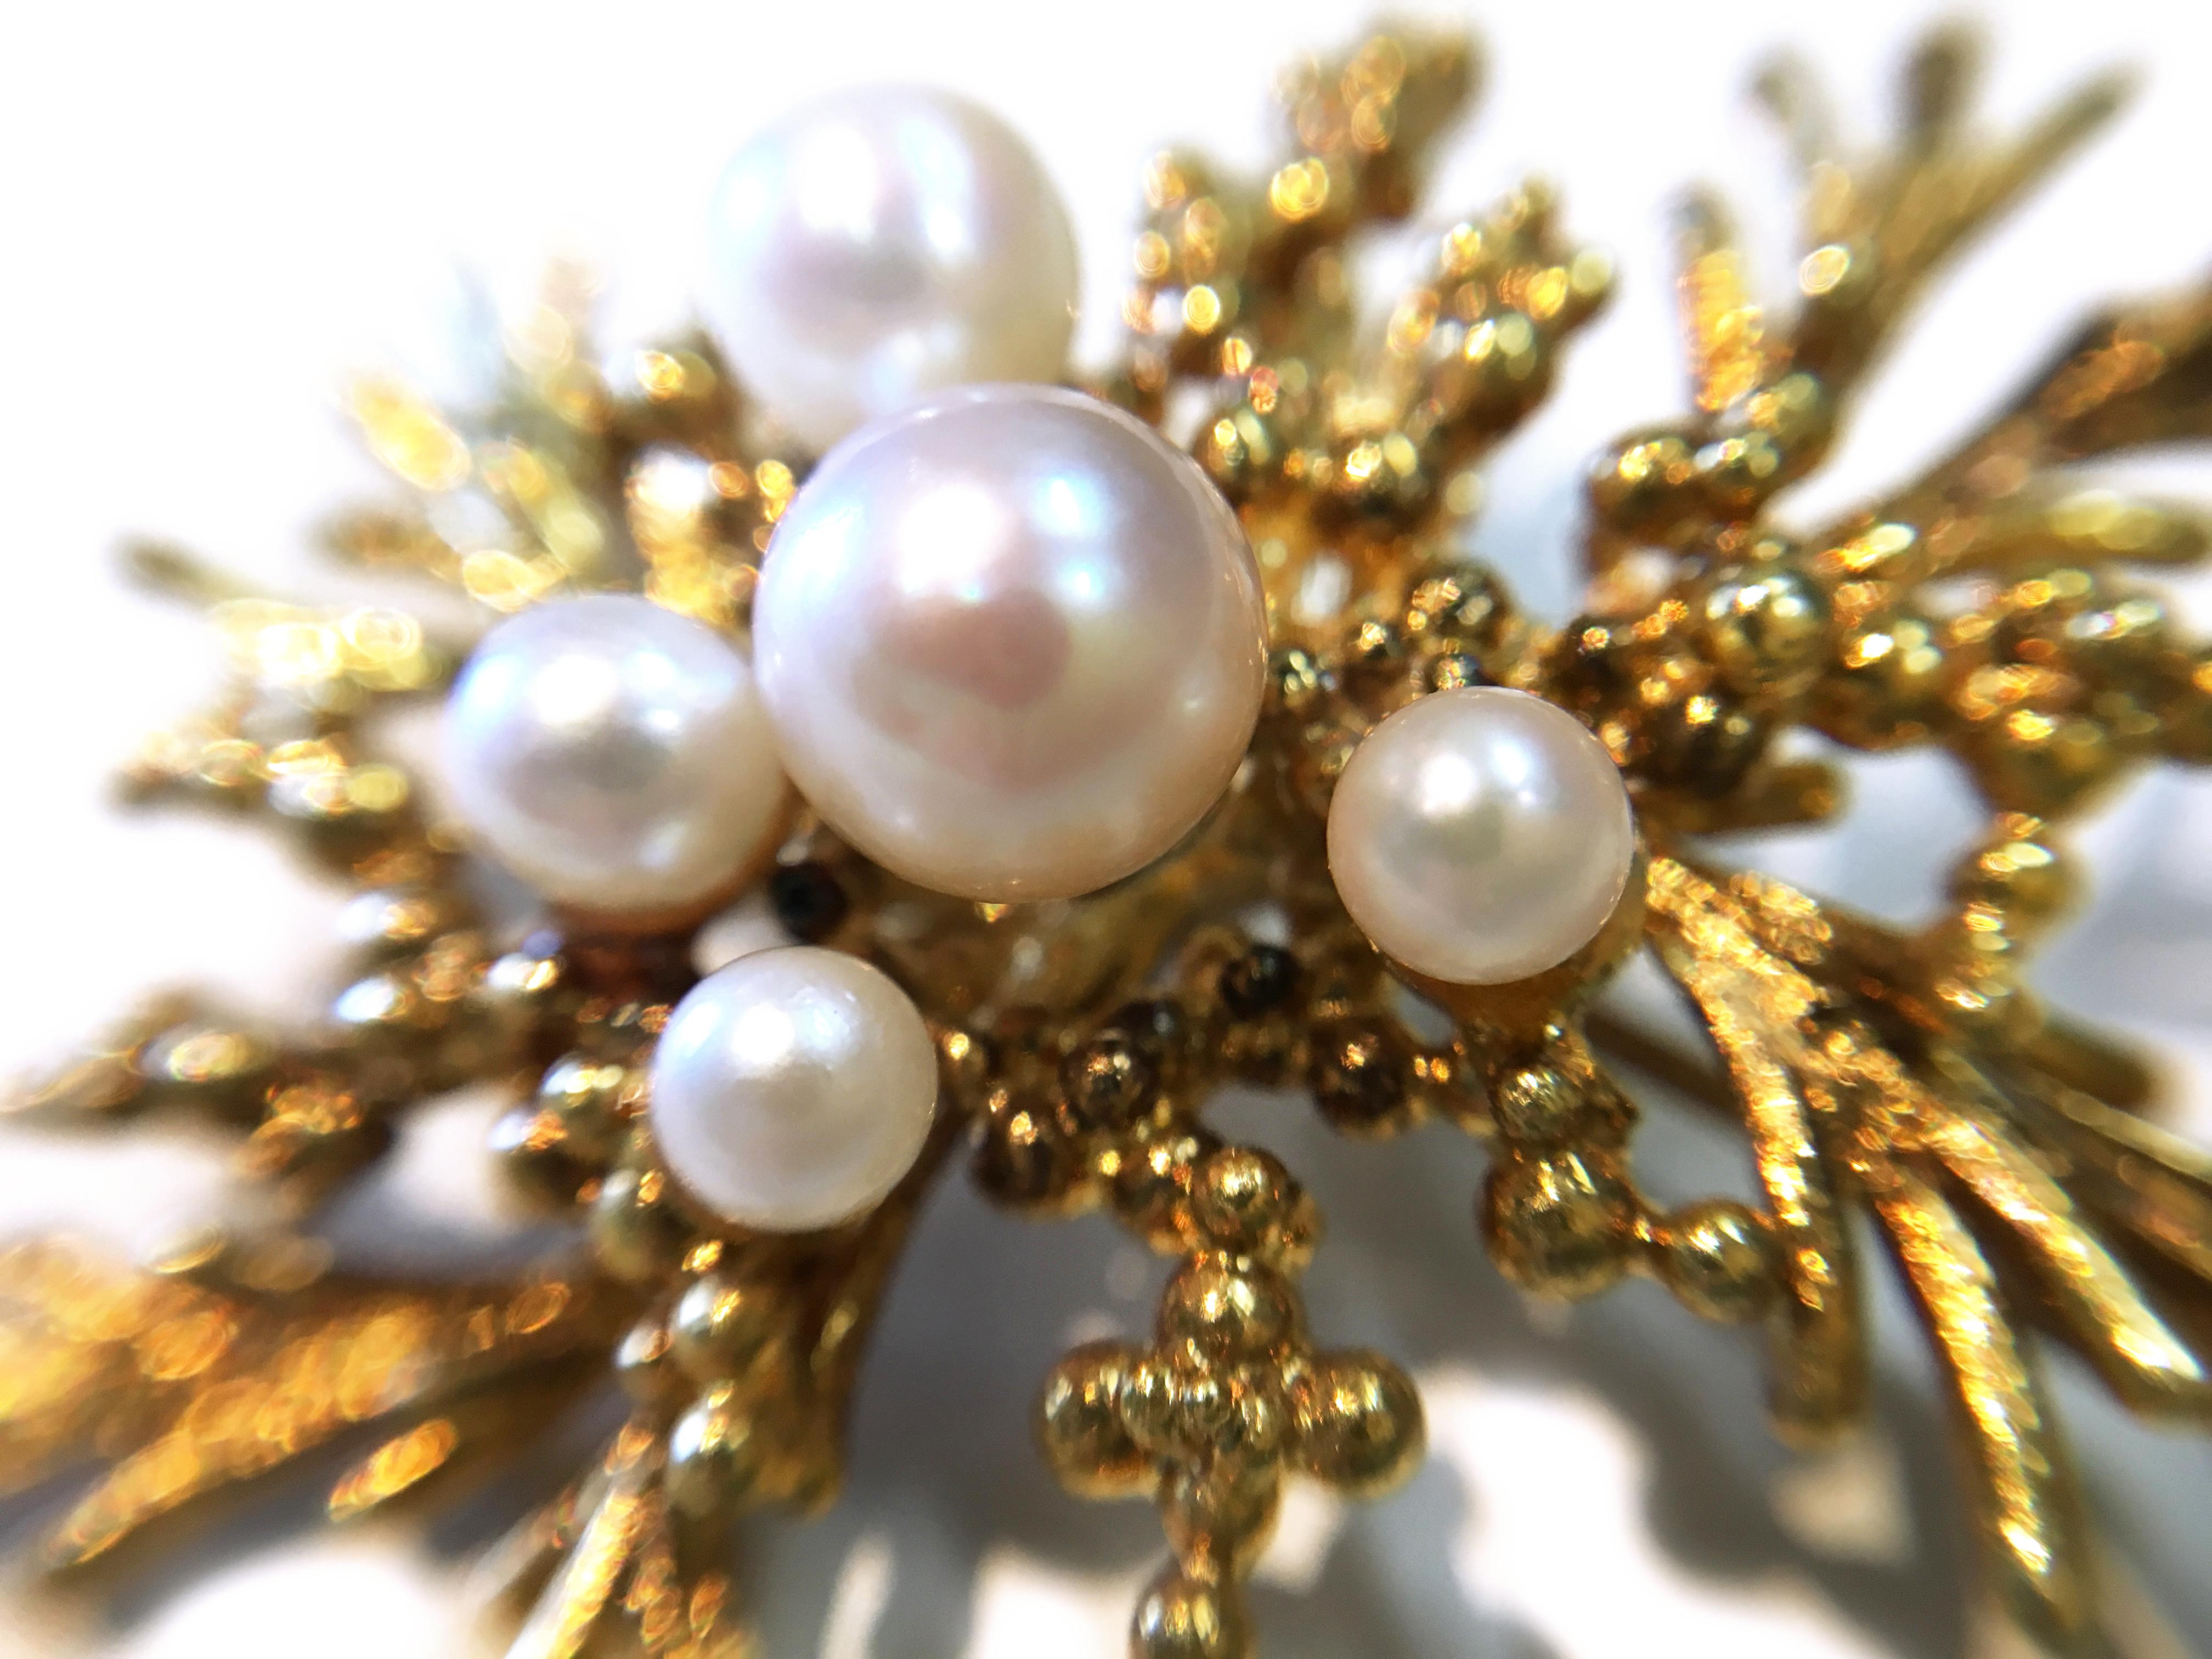 14 Karat Pearl Branches Brooch. Five Freshwater Pearls in graduated sizes ranging from 1.36mm-2.25mm adorn the center of this branch and berries brooch. Stamped on the back of the brooch is 585 A*D. The brooch/pin has a gold weight of 10.5 grams. 